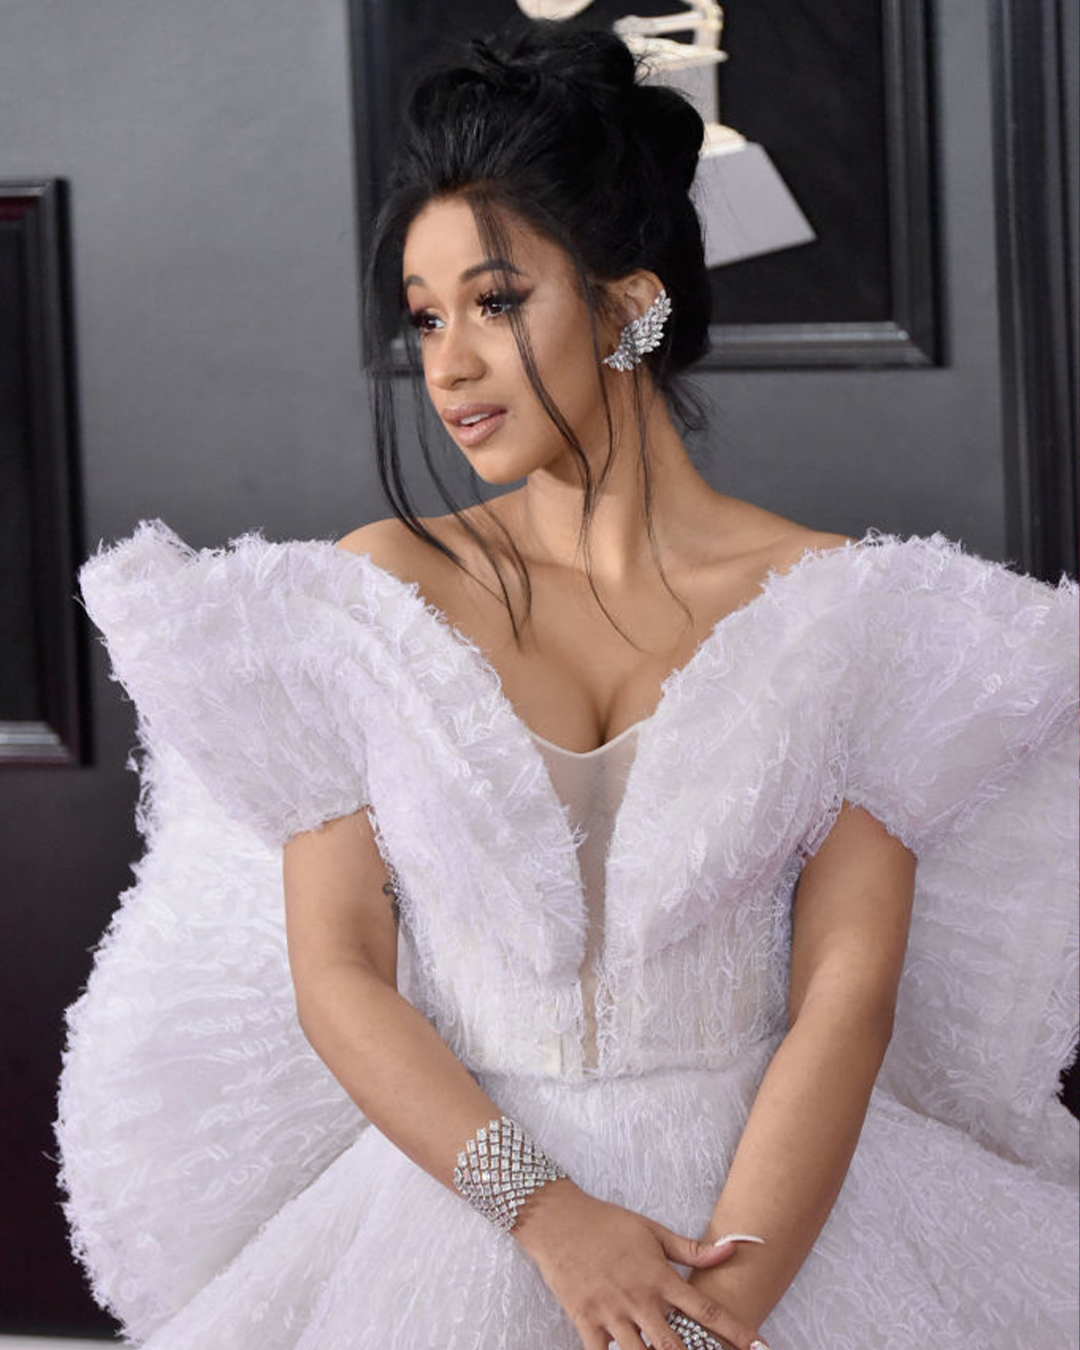 Cardi B’s Bling with Natural Diamonds